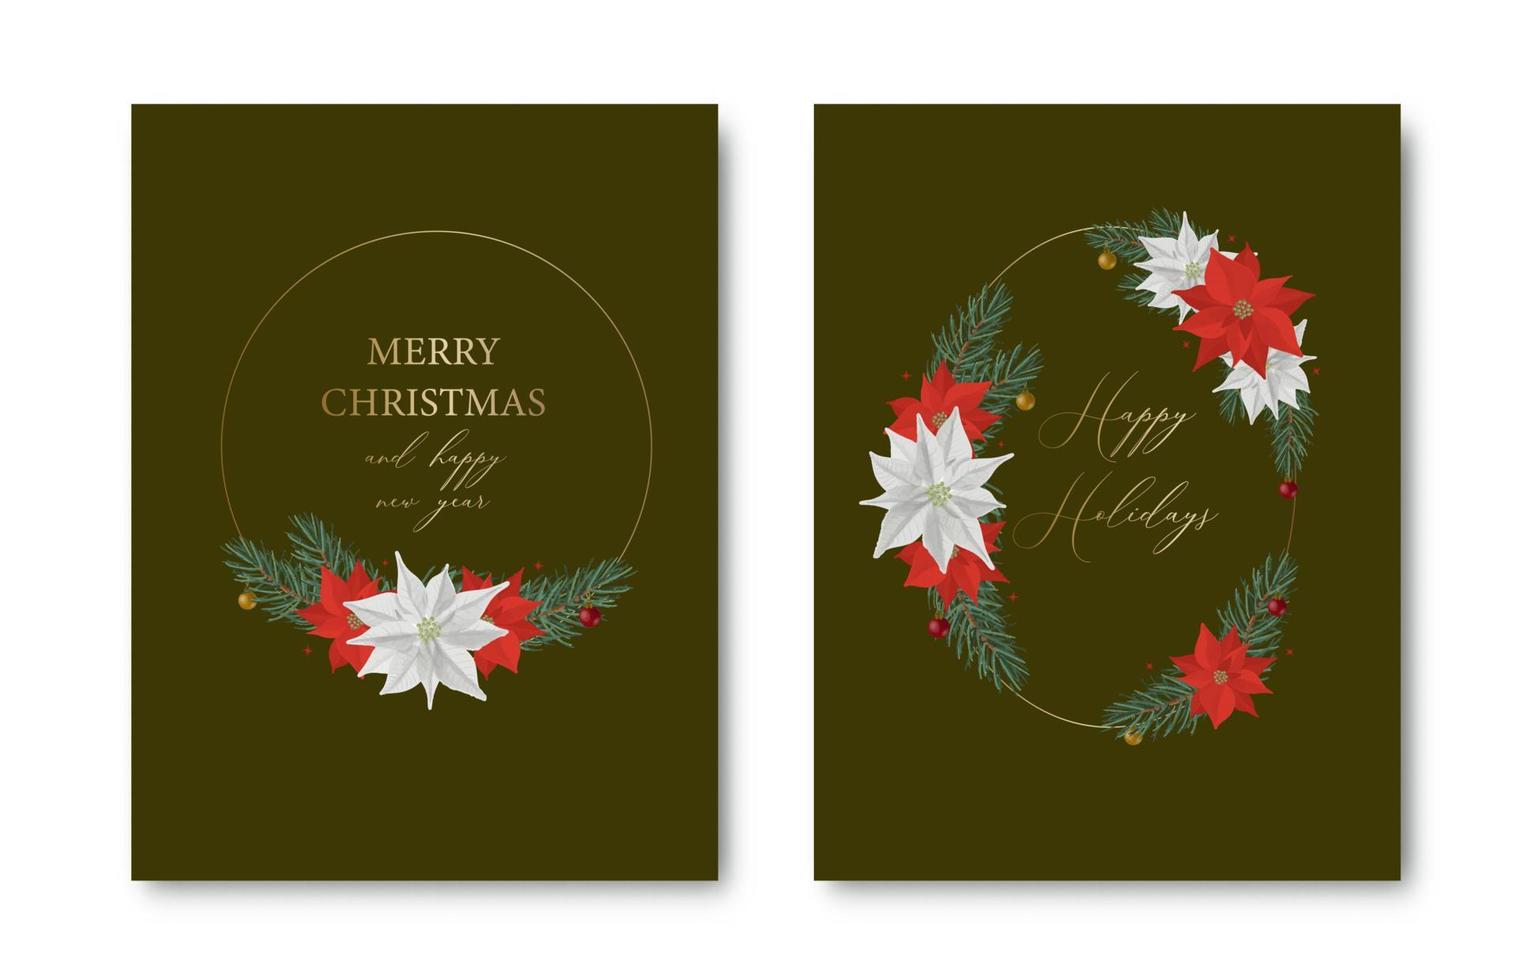 Set of Elegant Merry Christmas and New Year cards with pine wreath, mistletoe, winter plants design illustration for greetings, invitation, flyer, brochure, cover. vector